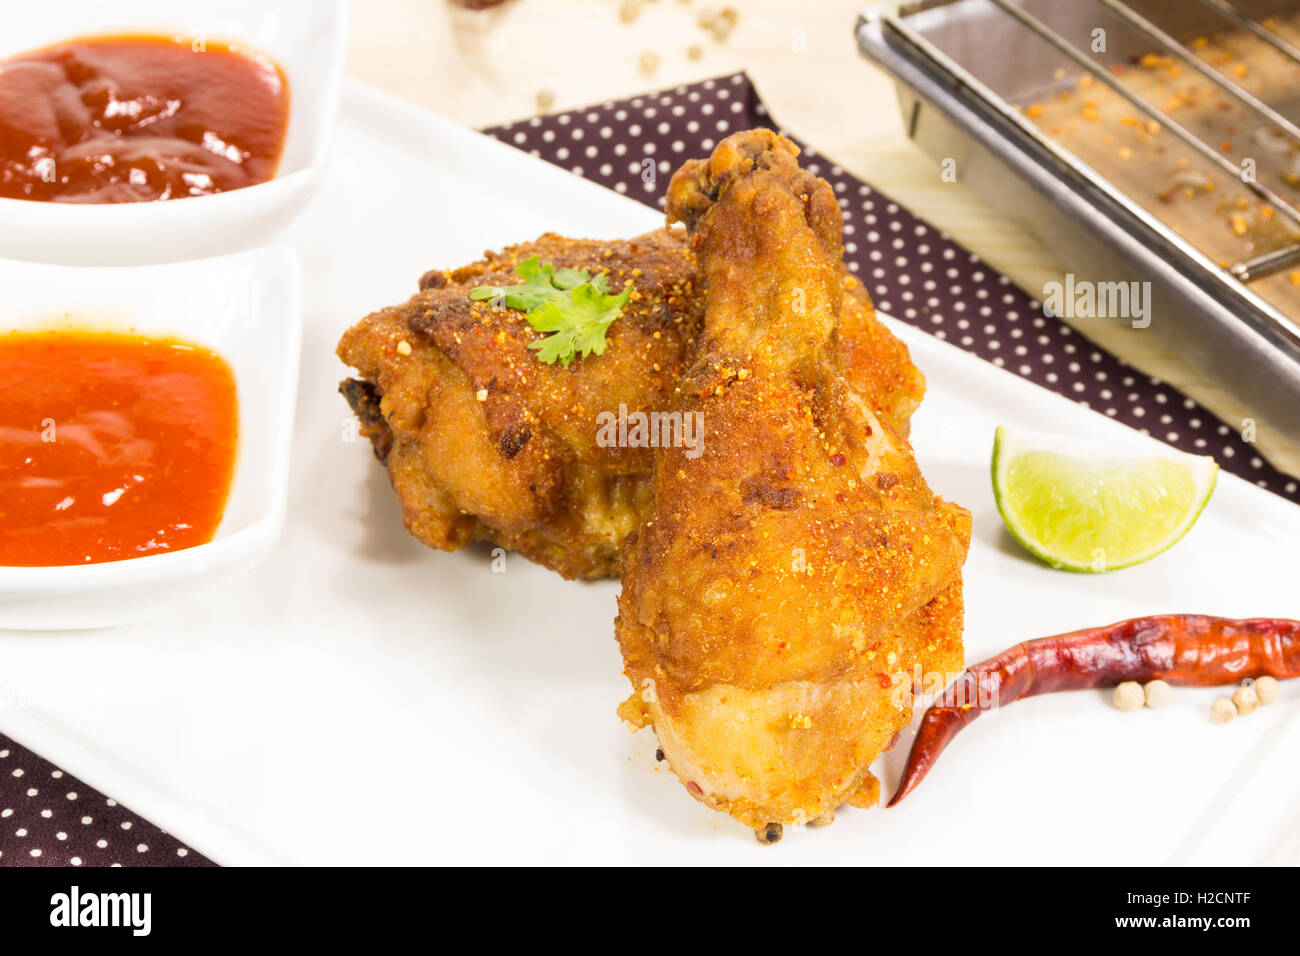 fried crispy chicken on the dish and tray Stock Photo